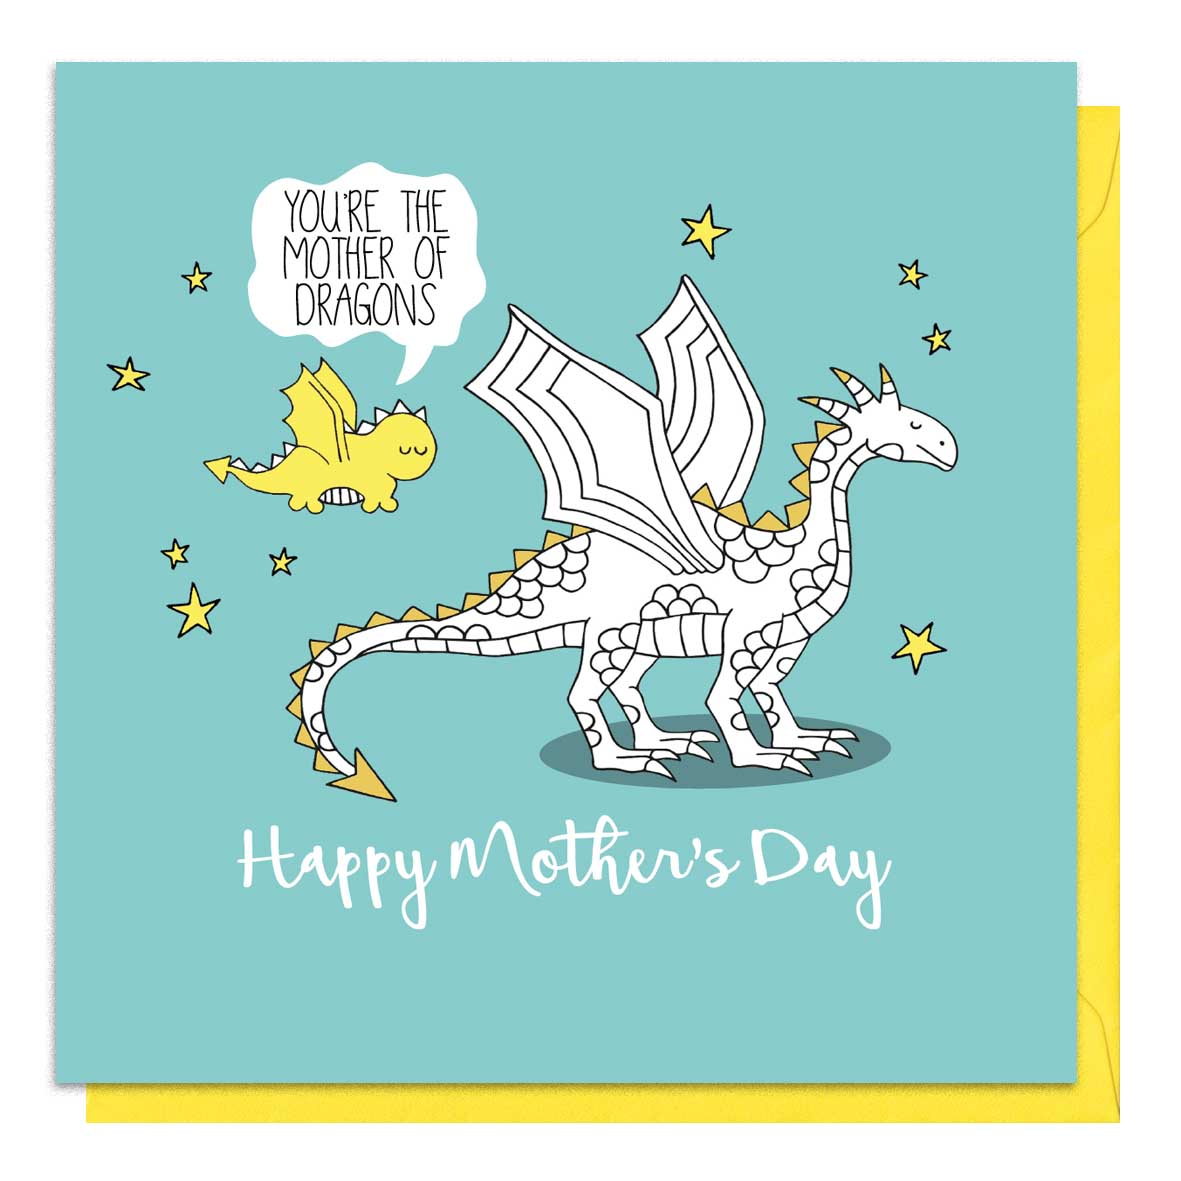 Blue mother's day card featuring an illustration of a mother and baby dragon